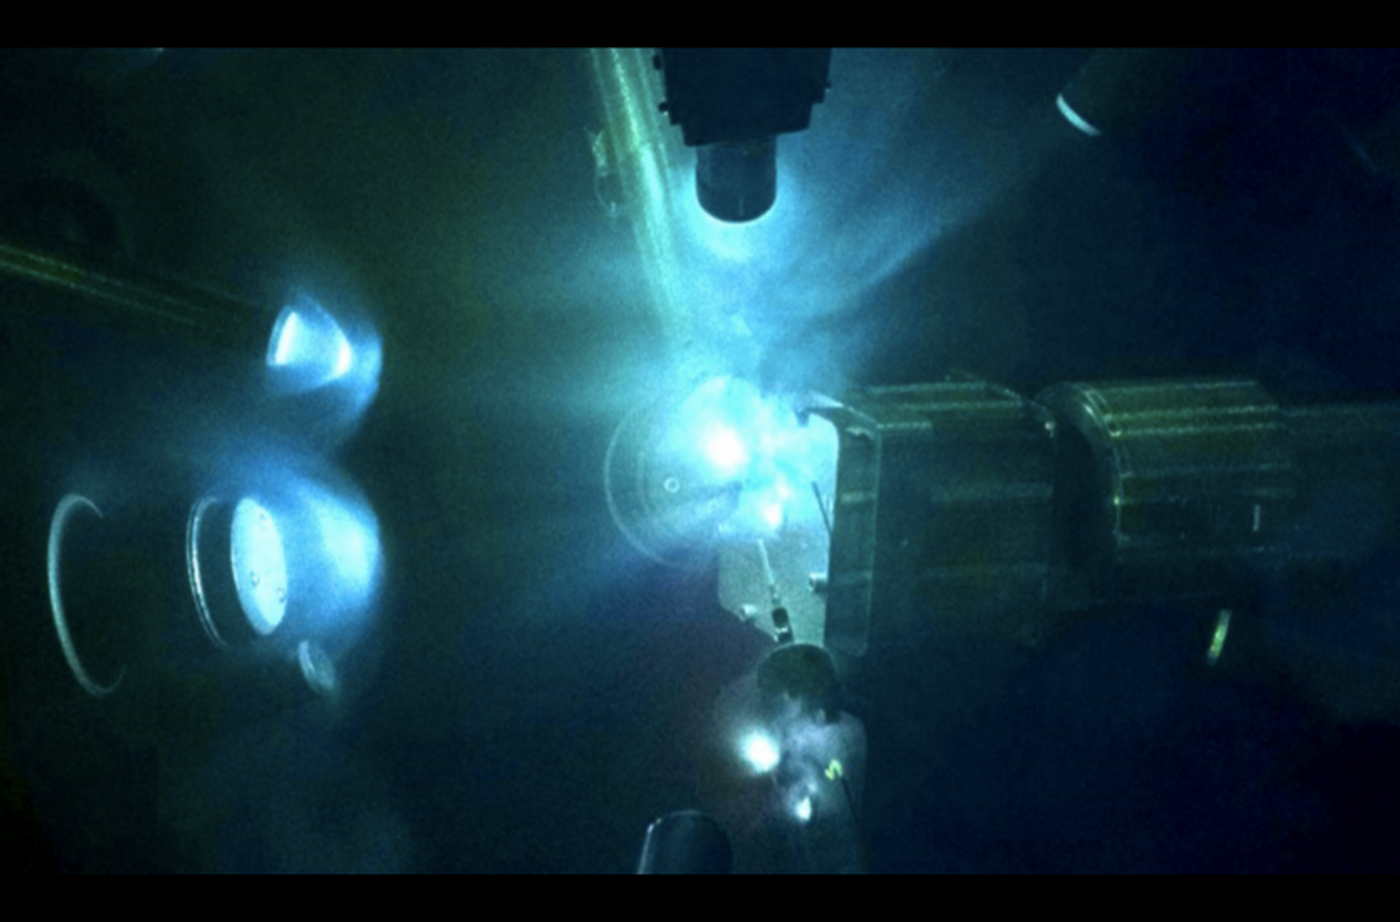 Inside the target chamber lasers were used to compress iron-silicon samples to mimic the ultrahigh pressures at the cores of super-Earths. (Laboratory for Laser Energetics)